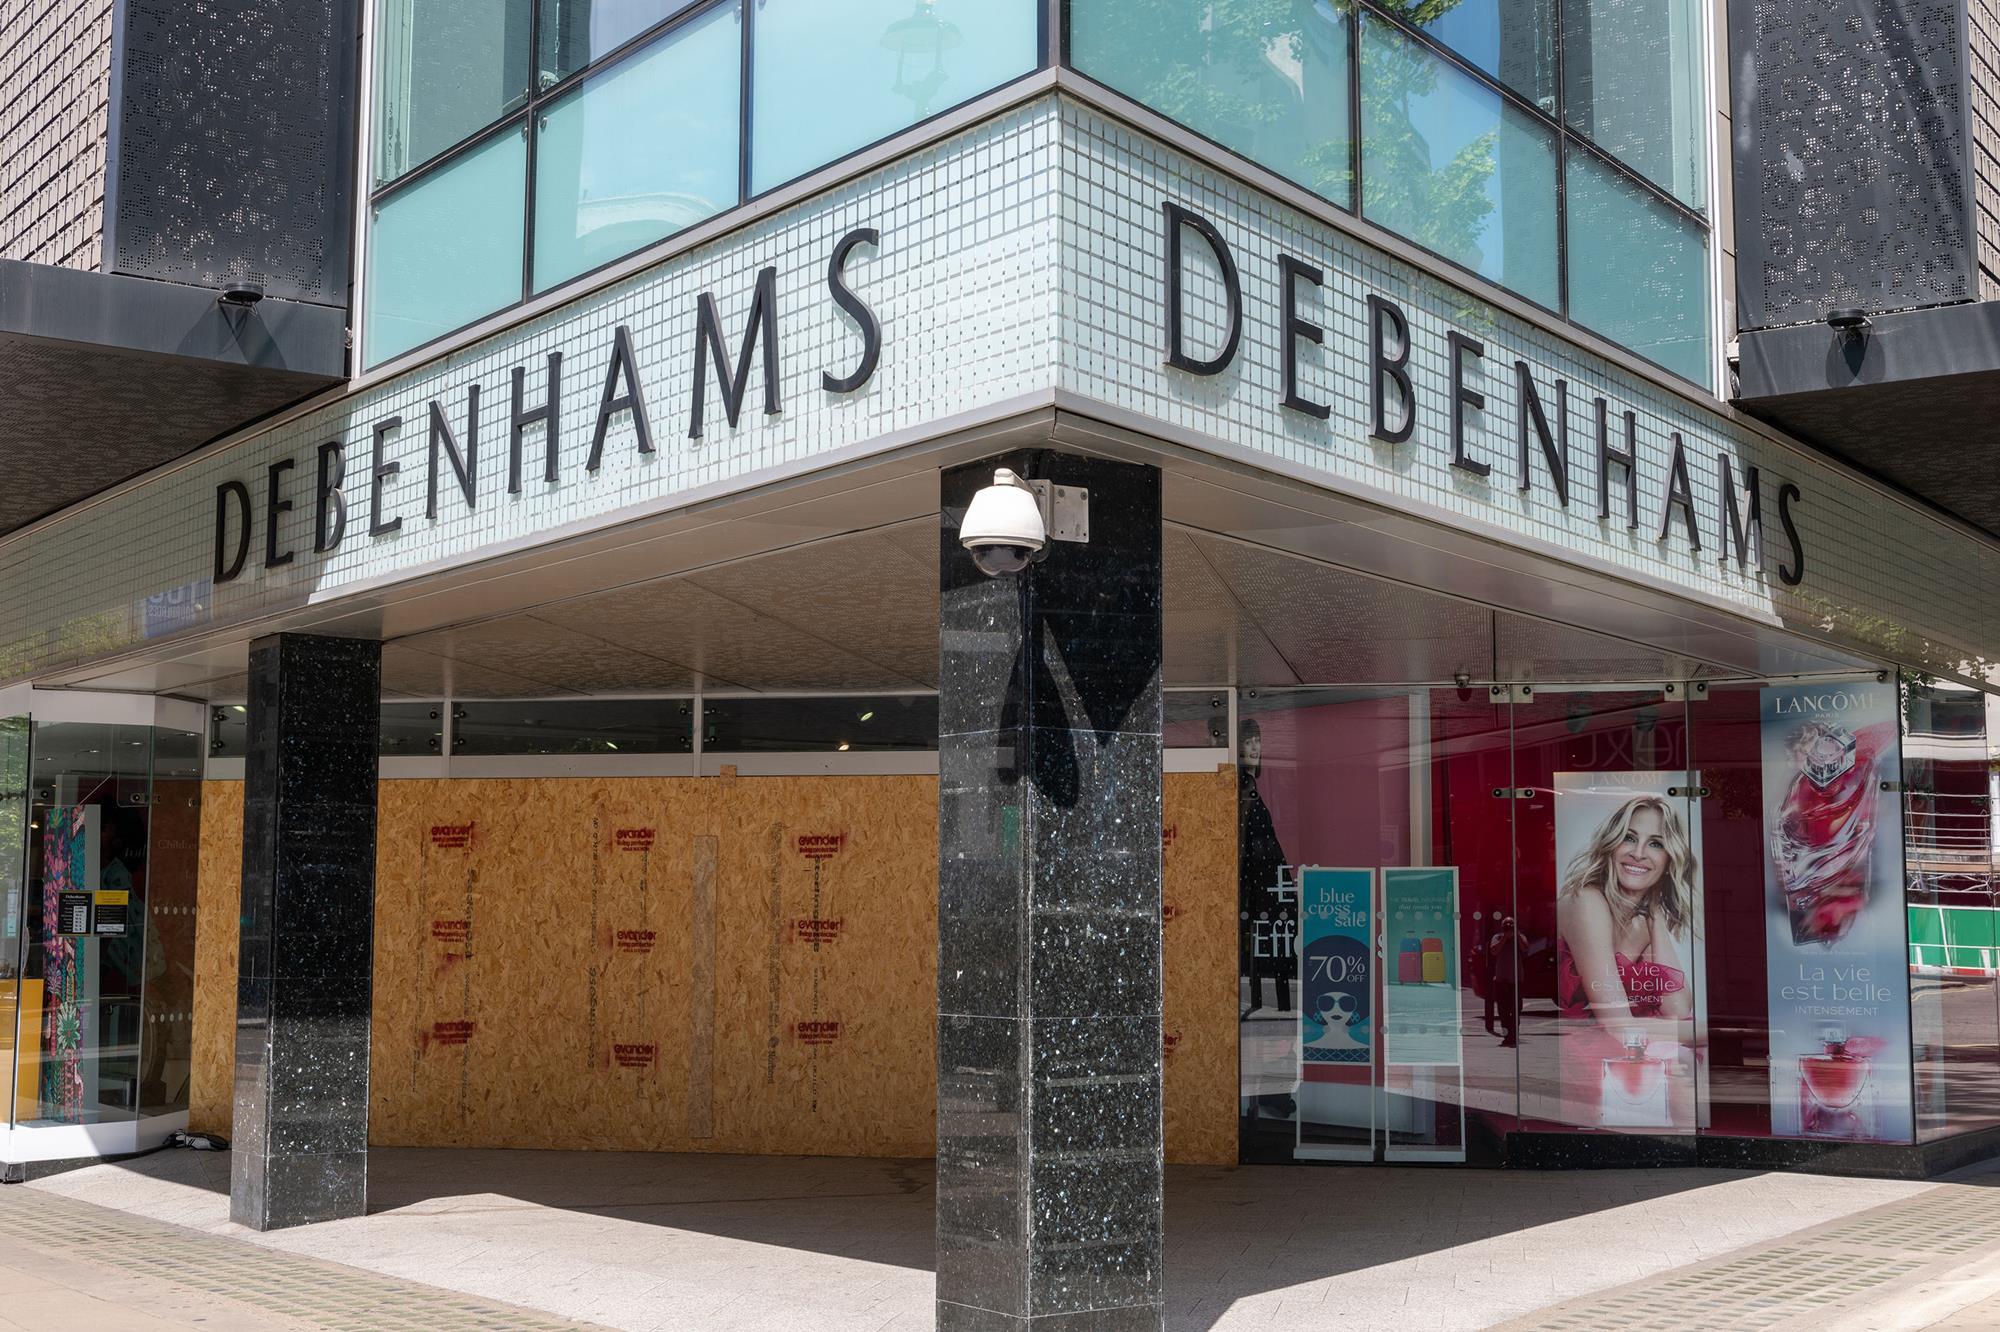 Community space takes over former Debenhams store in London